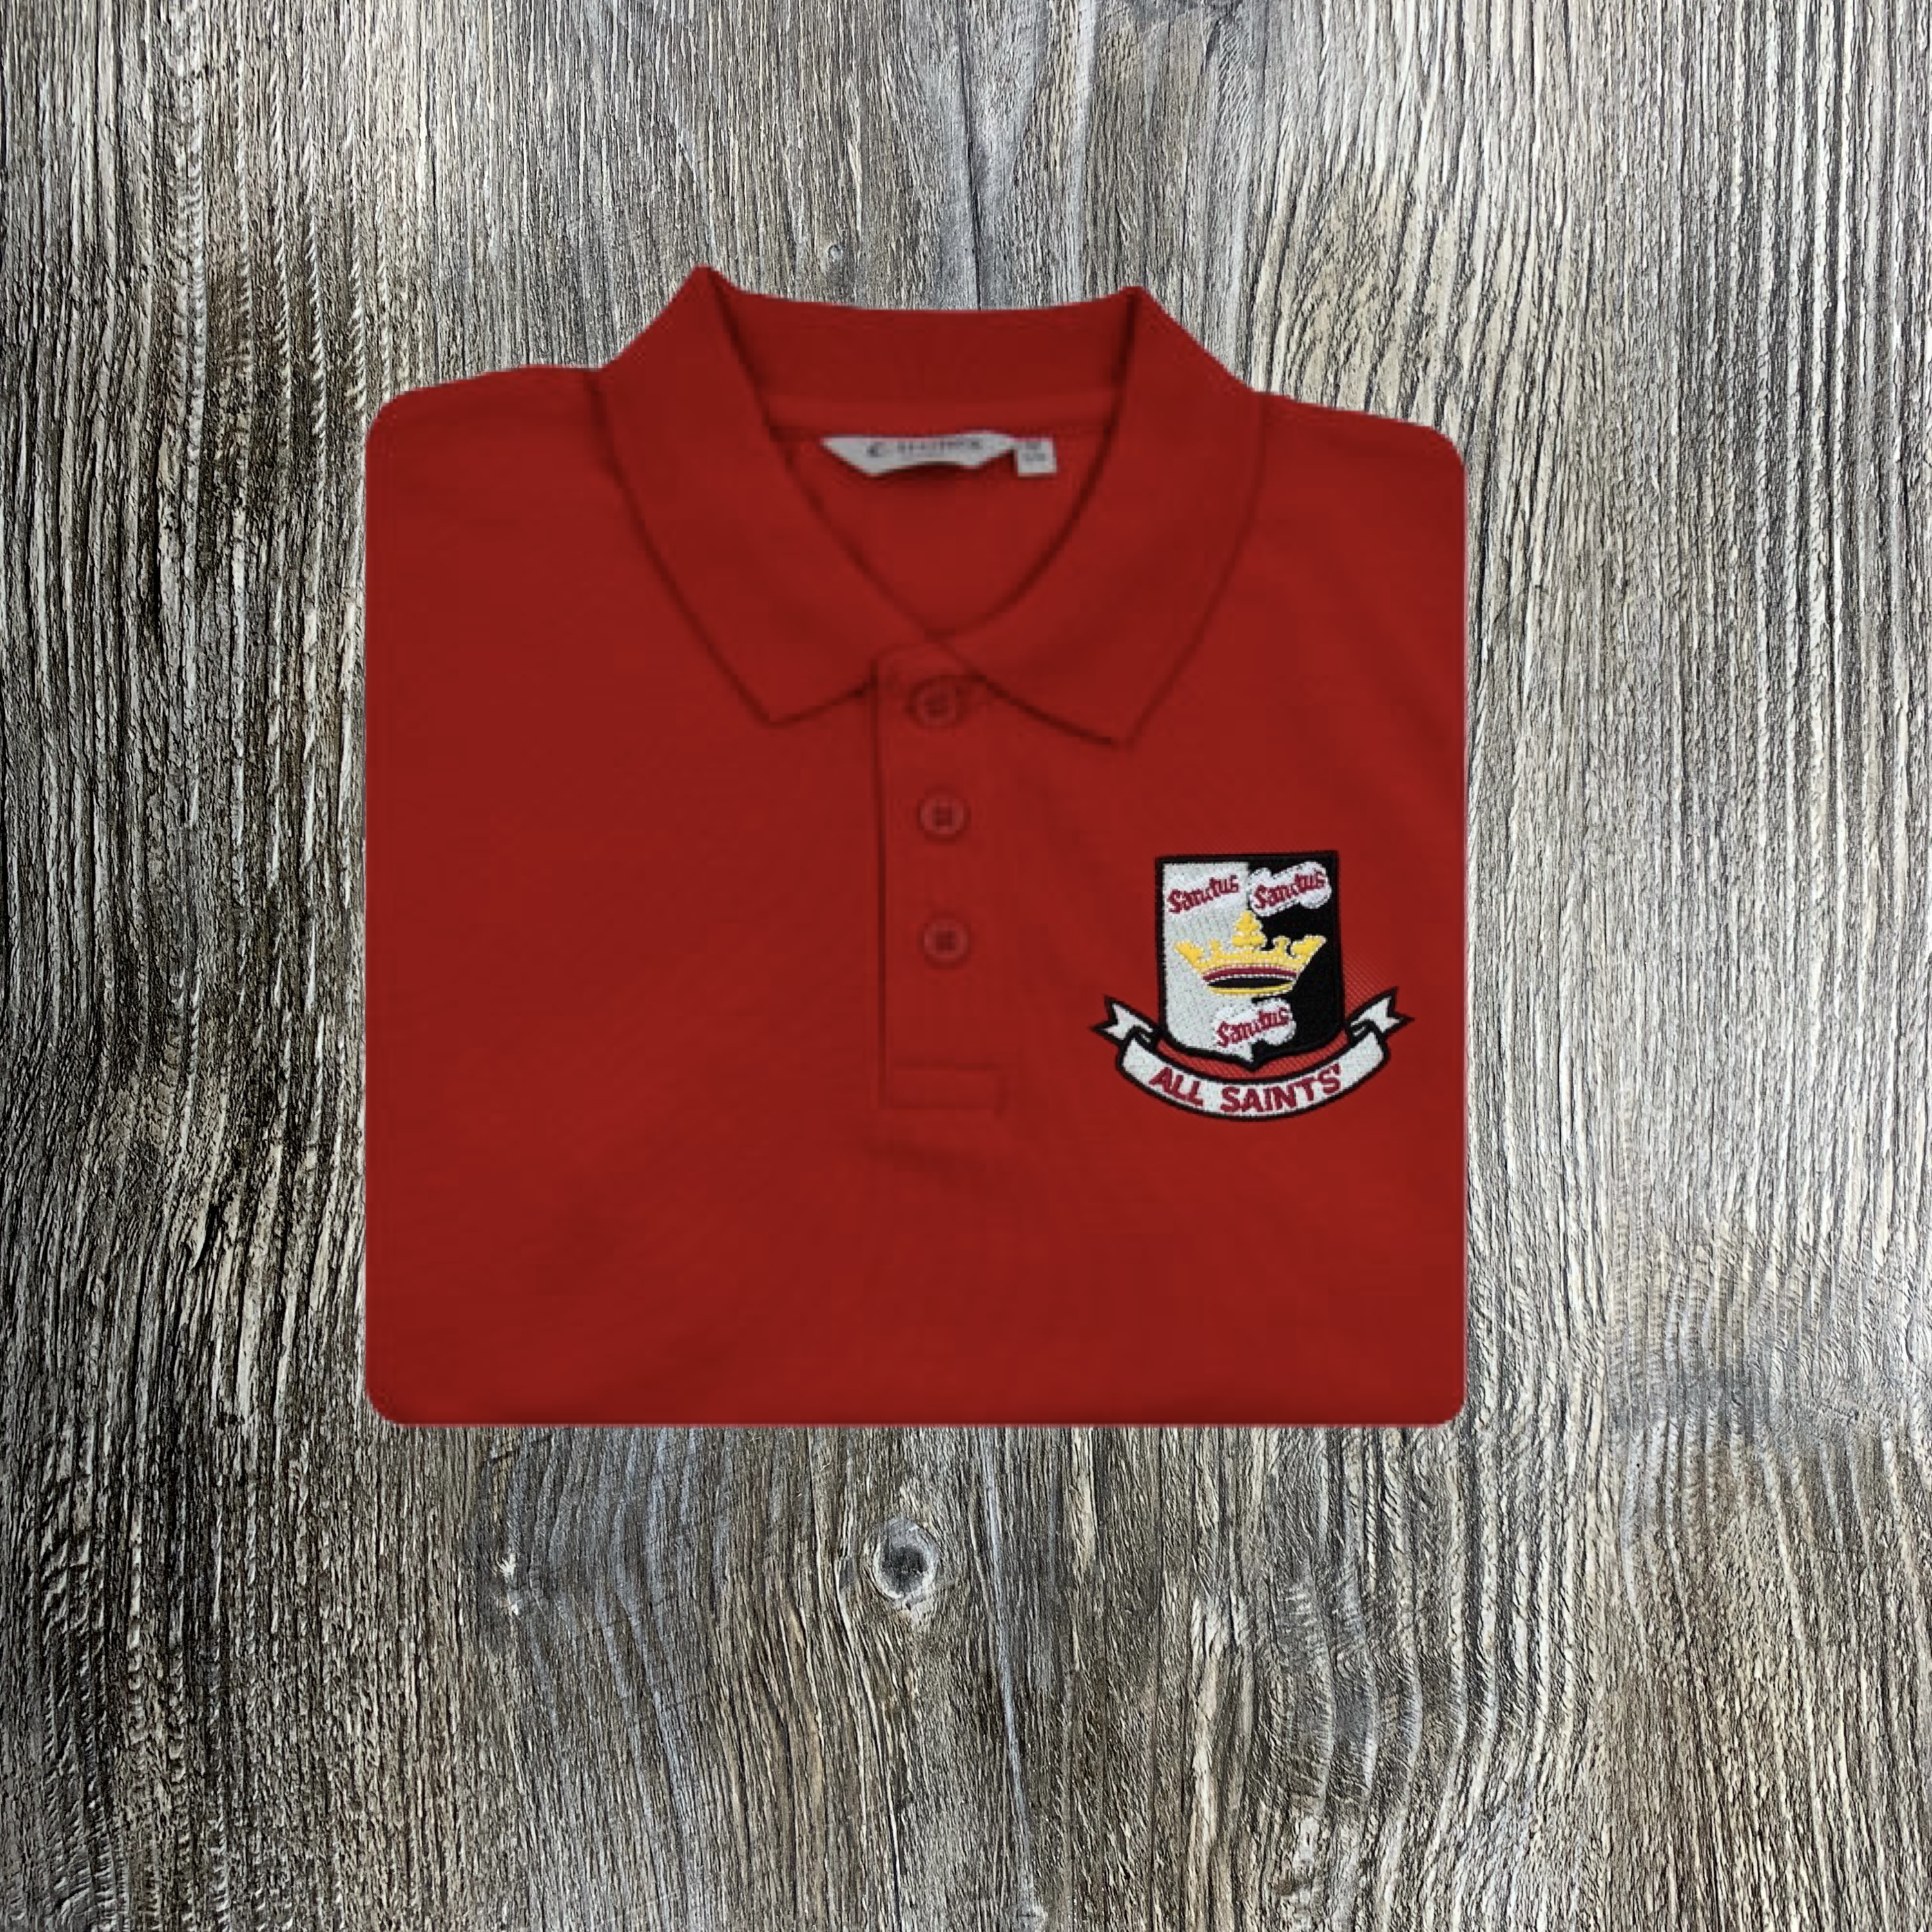 All Saints’ Red Polo